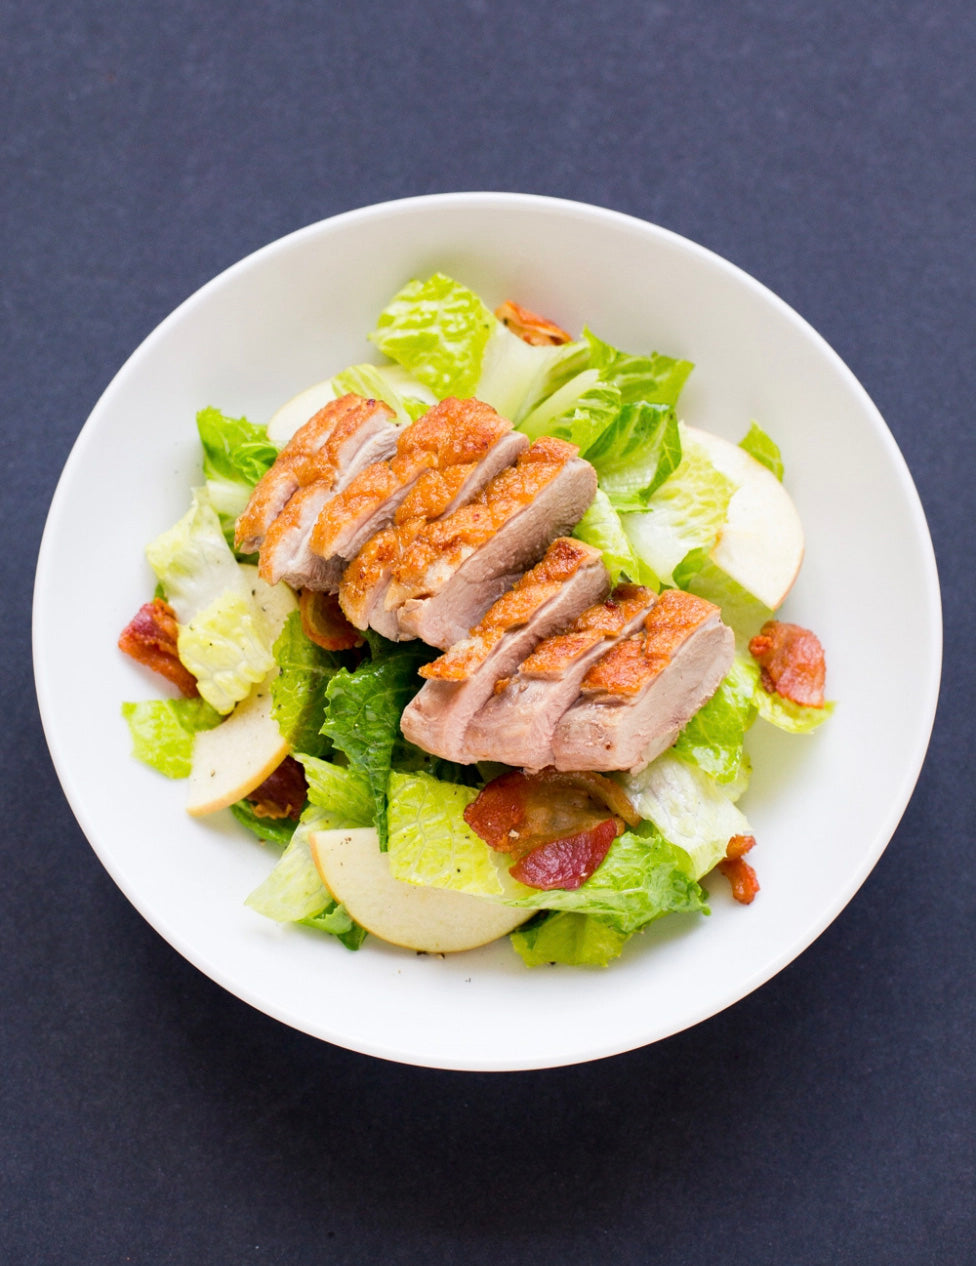 Apple, Bacon, and Duck Breast Salad